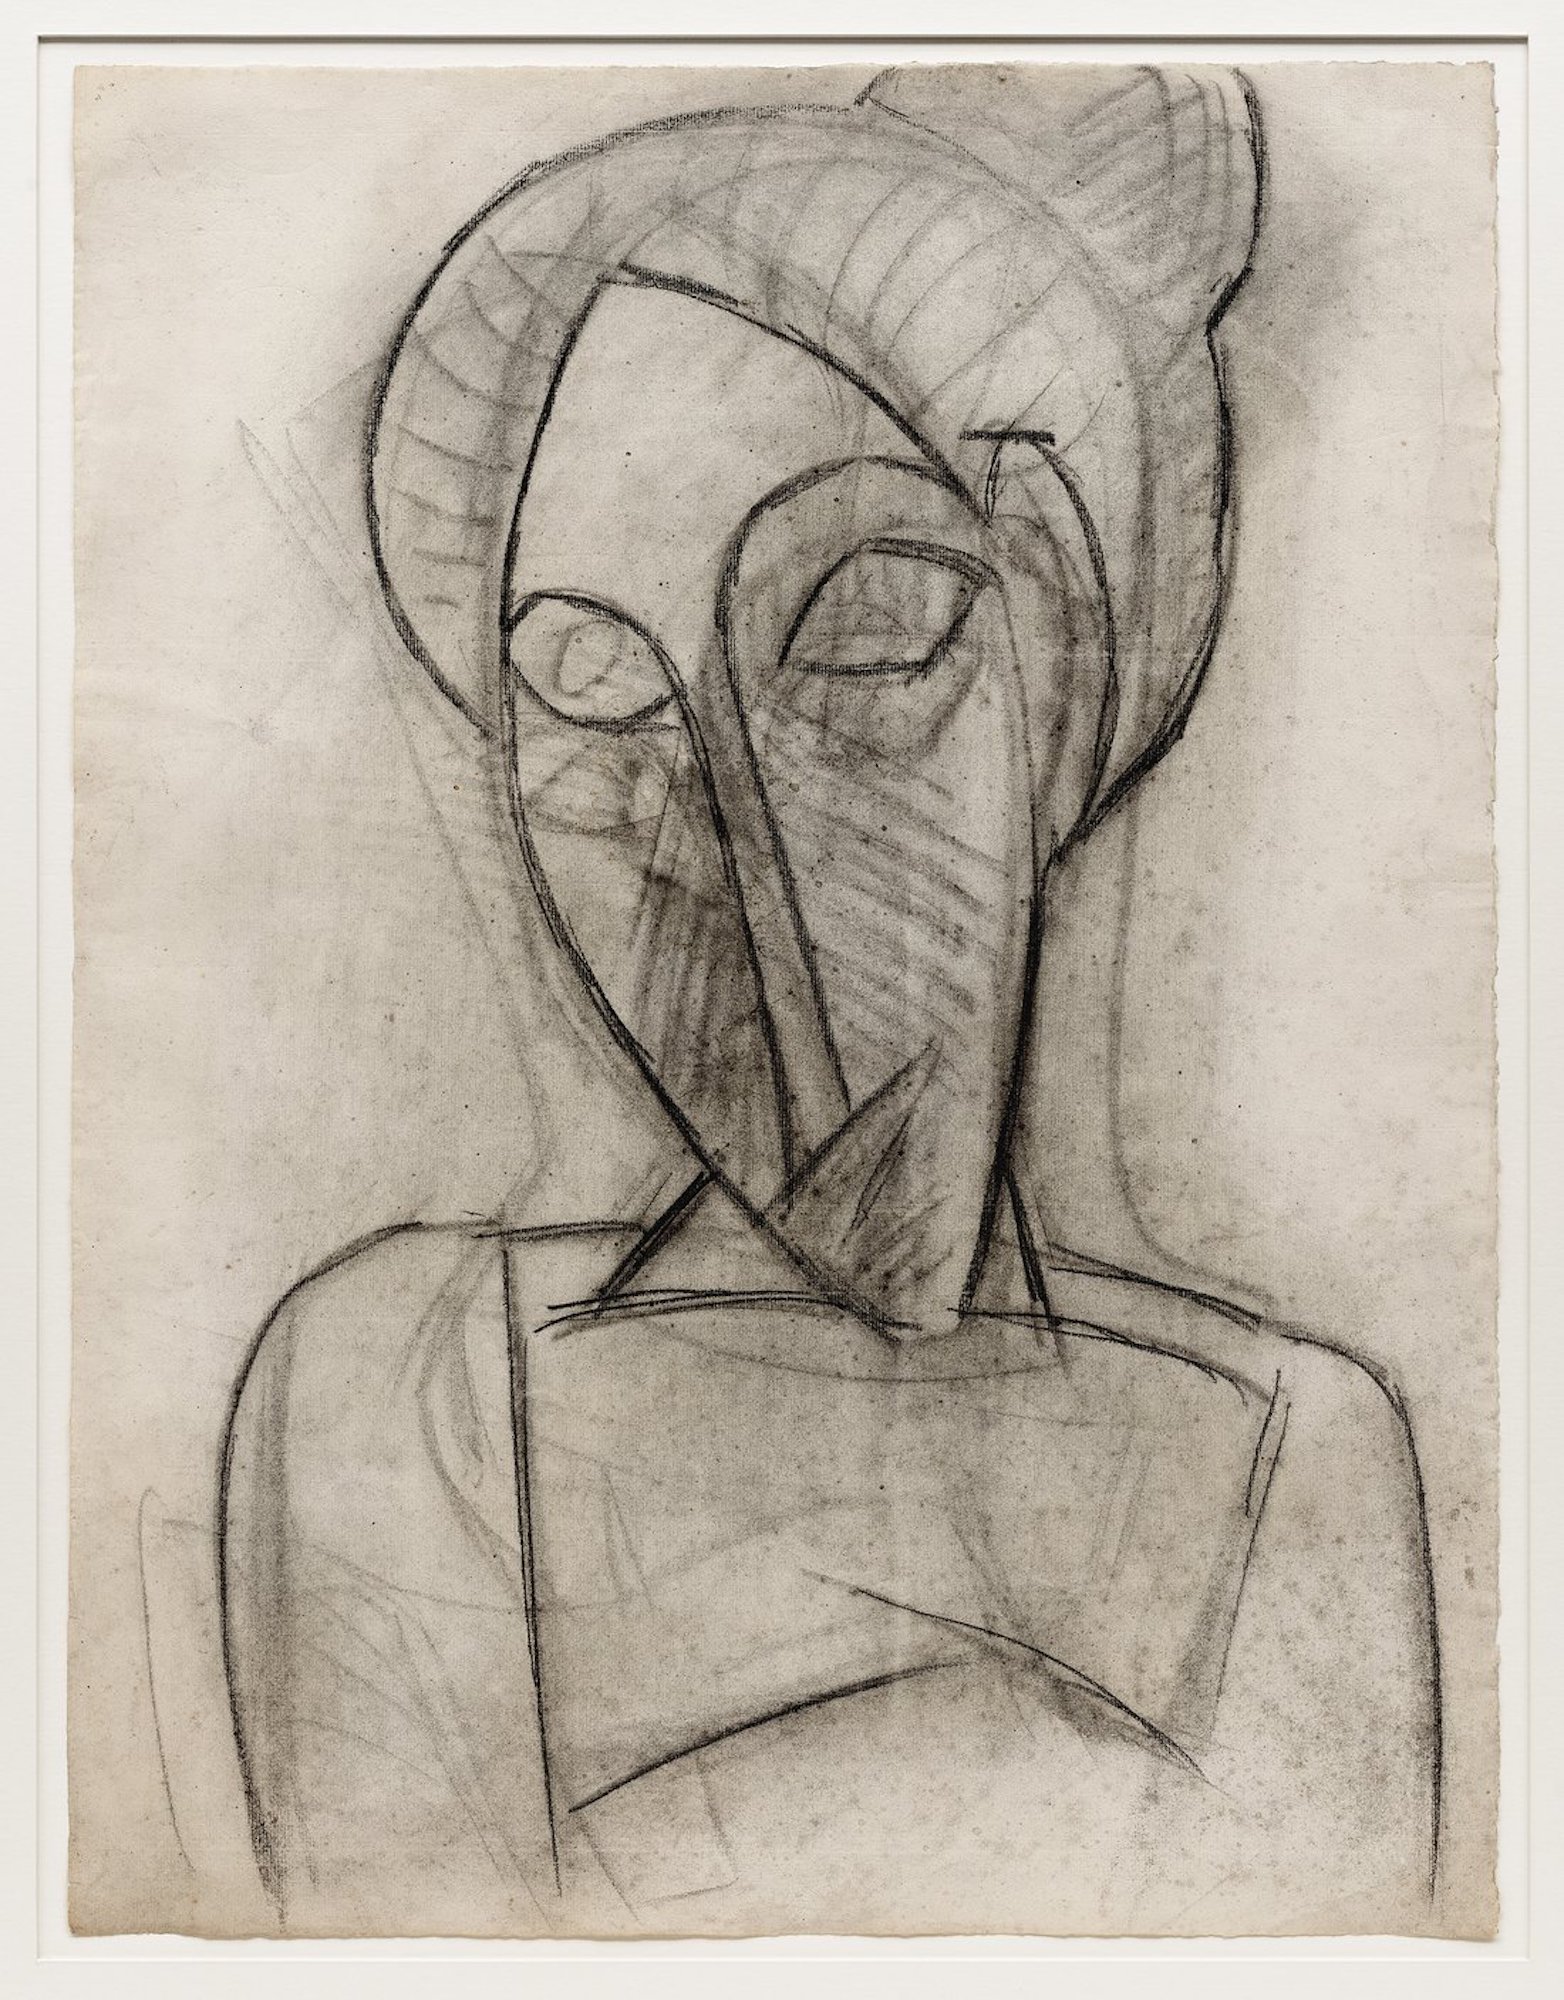 Visage triste (Head and Shoulders of a Woman), 1907 by Pablo Picasso